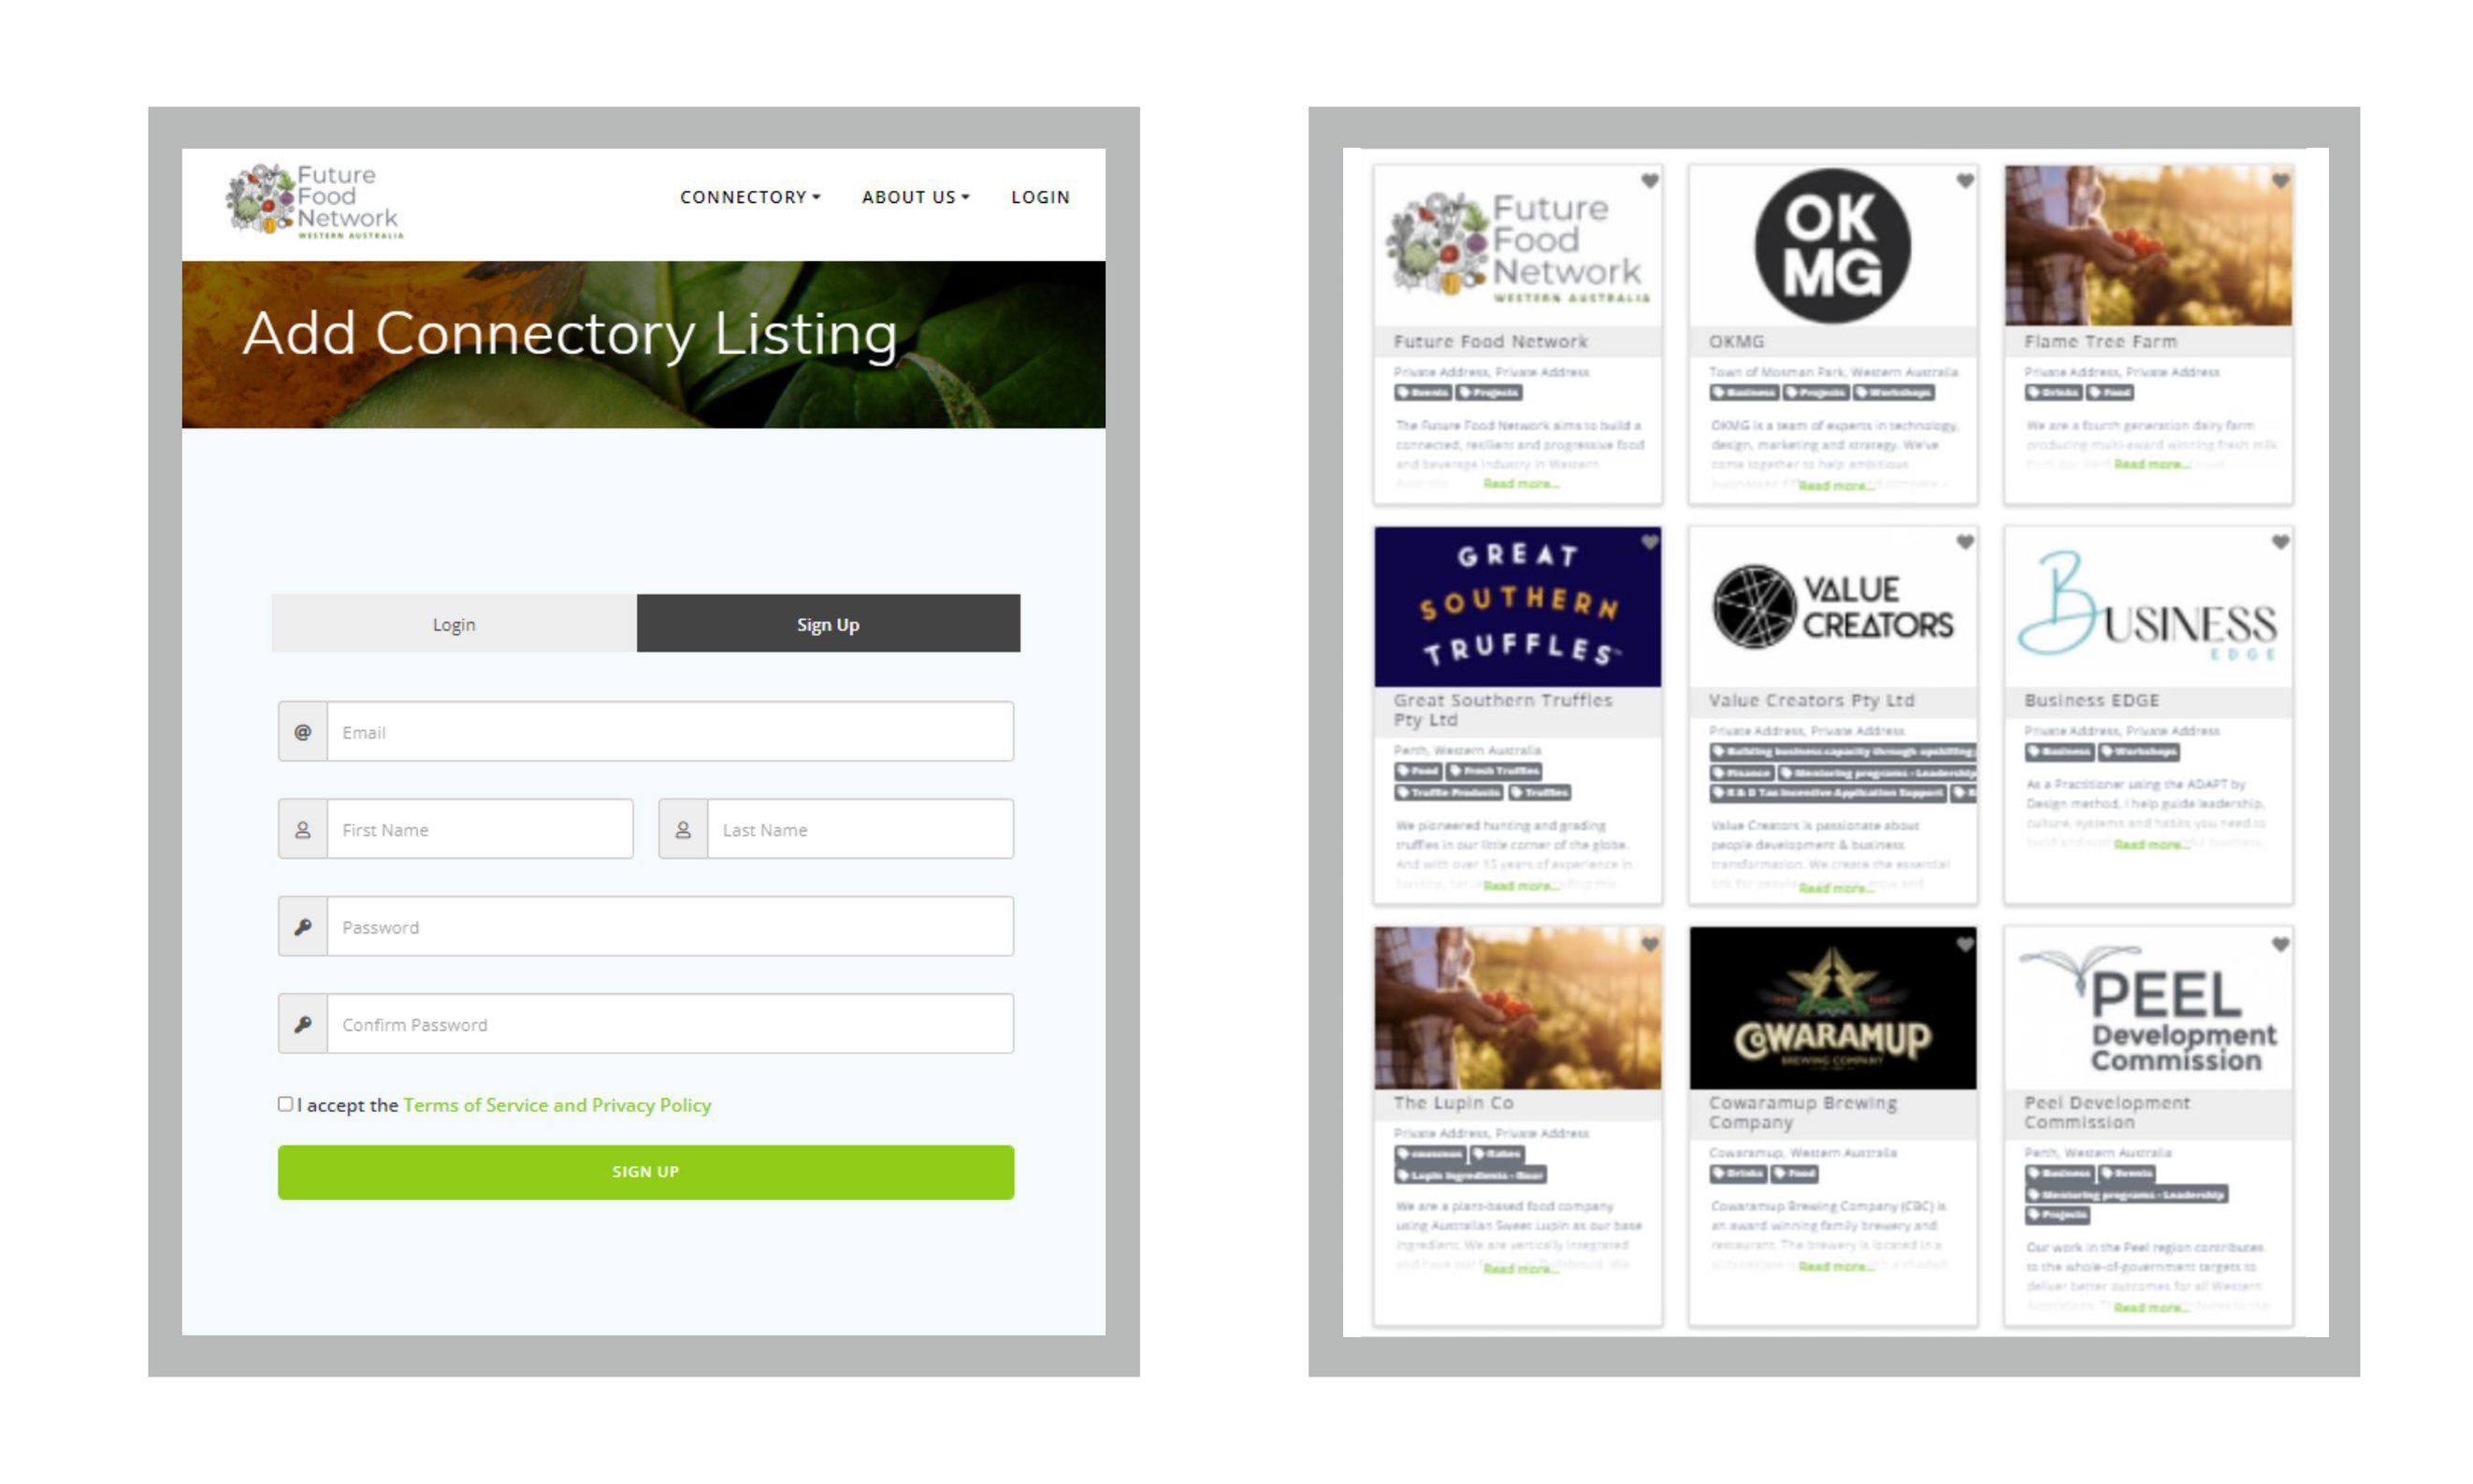 This producer-focused network’s new, free-to-join web portal helps Western Australian food producers keen to value-add connect with providers right along the F&B supply chain.